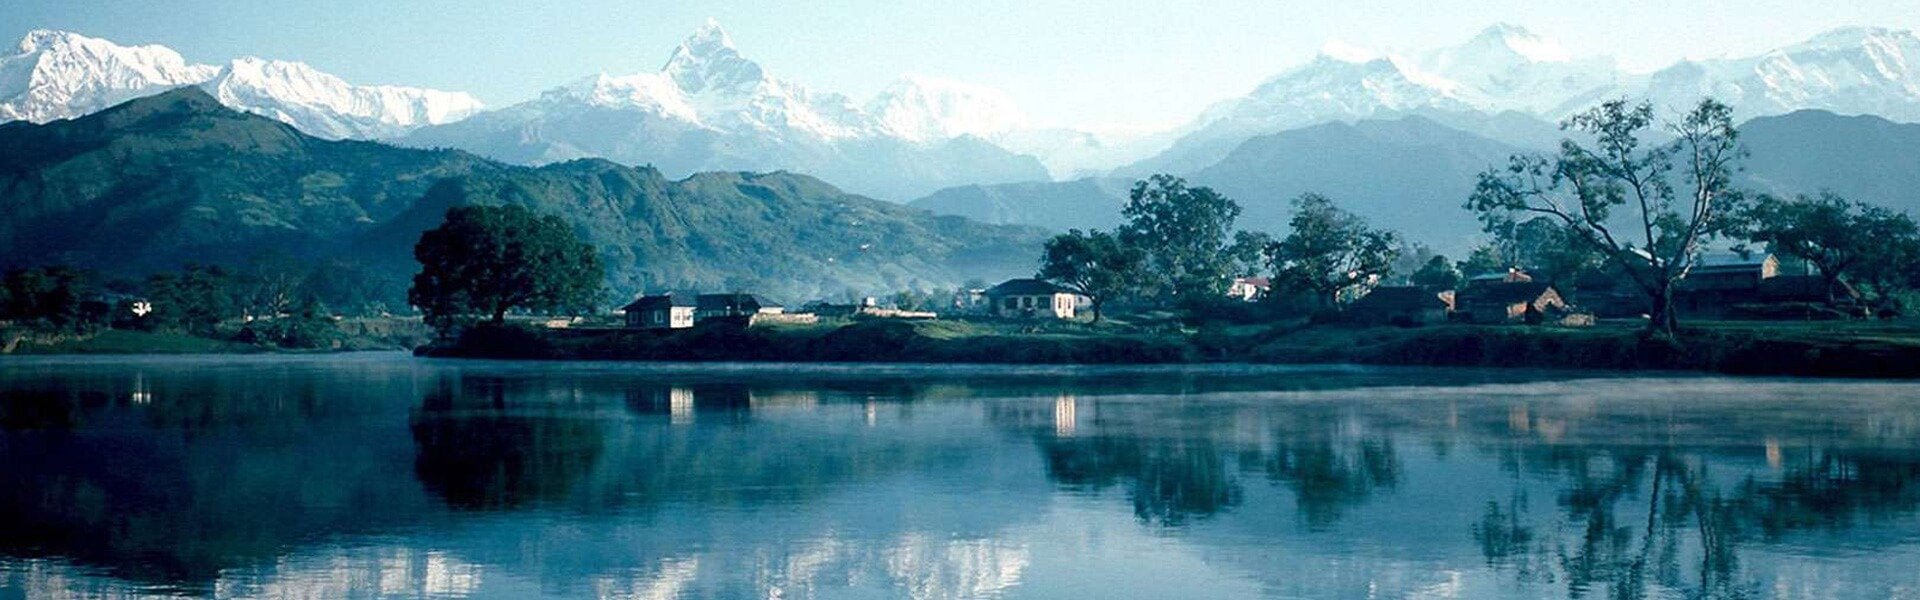 Winter treks and tours in Nepal 